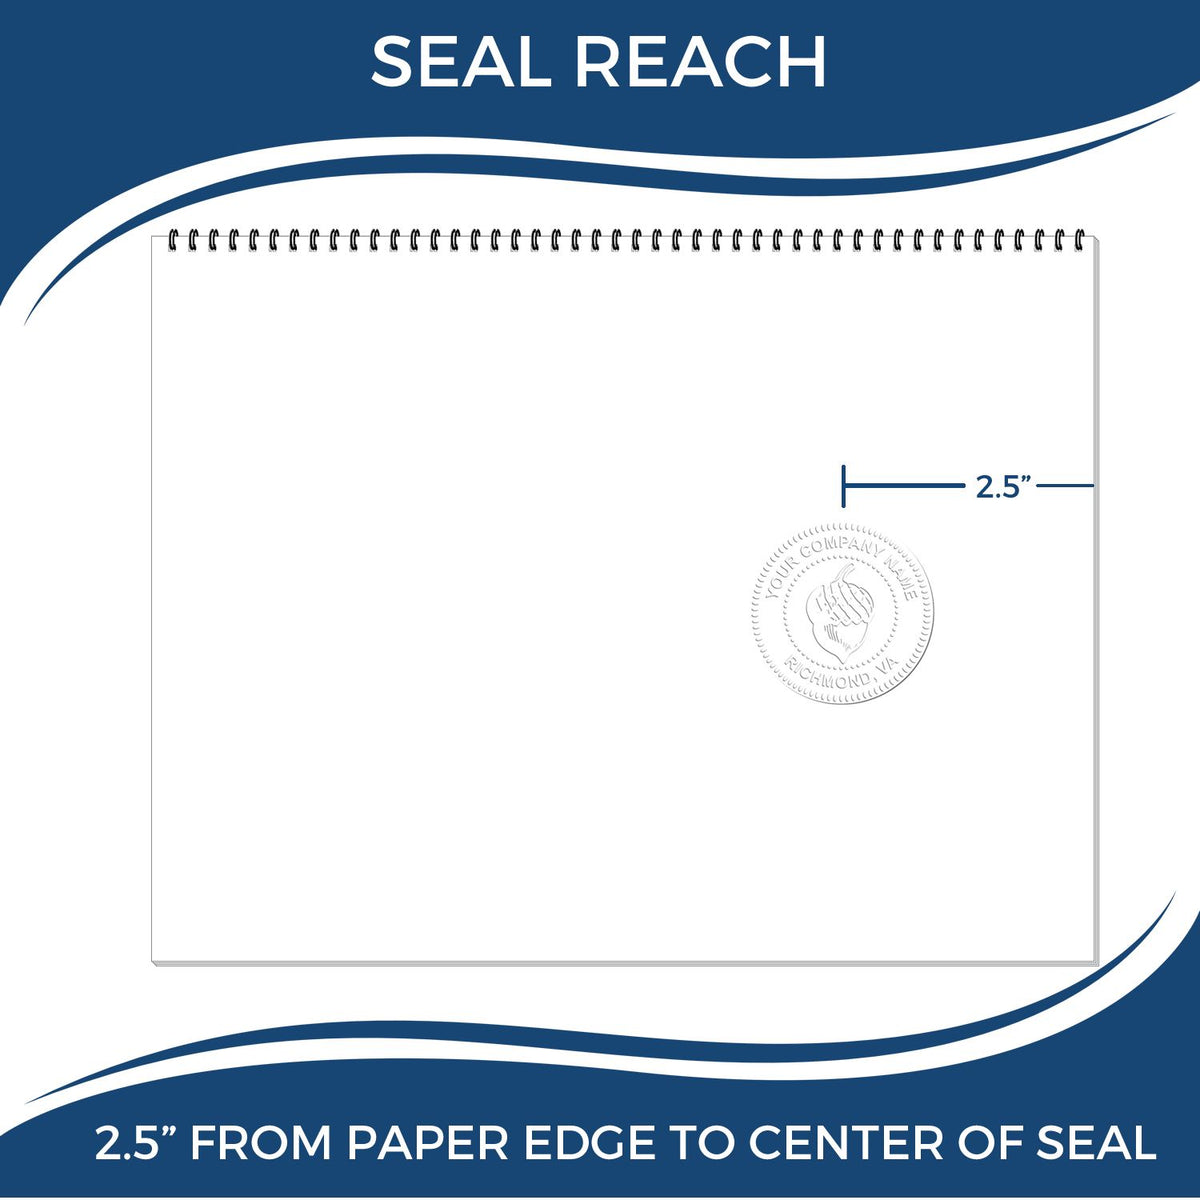 An infographic showing the seal reach which is represented by a ruler and a miniature seal image of the Long Reach Kentucky Geology Seal